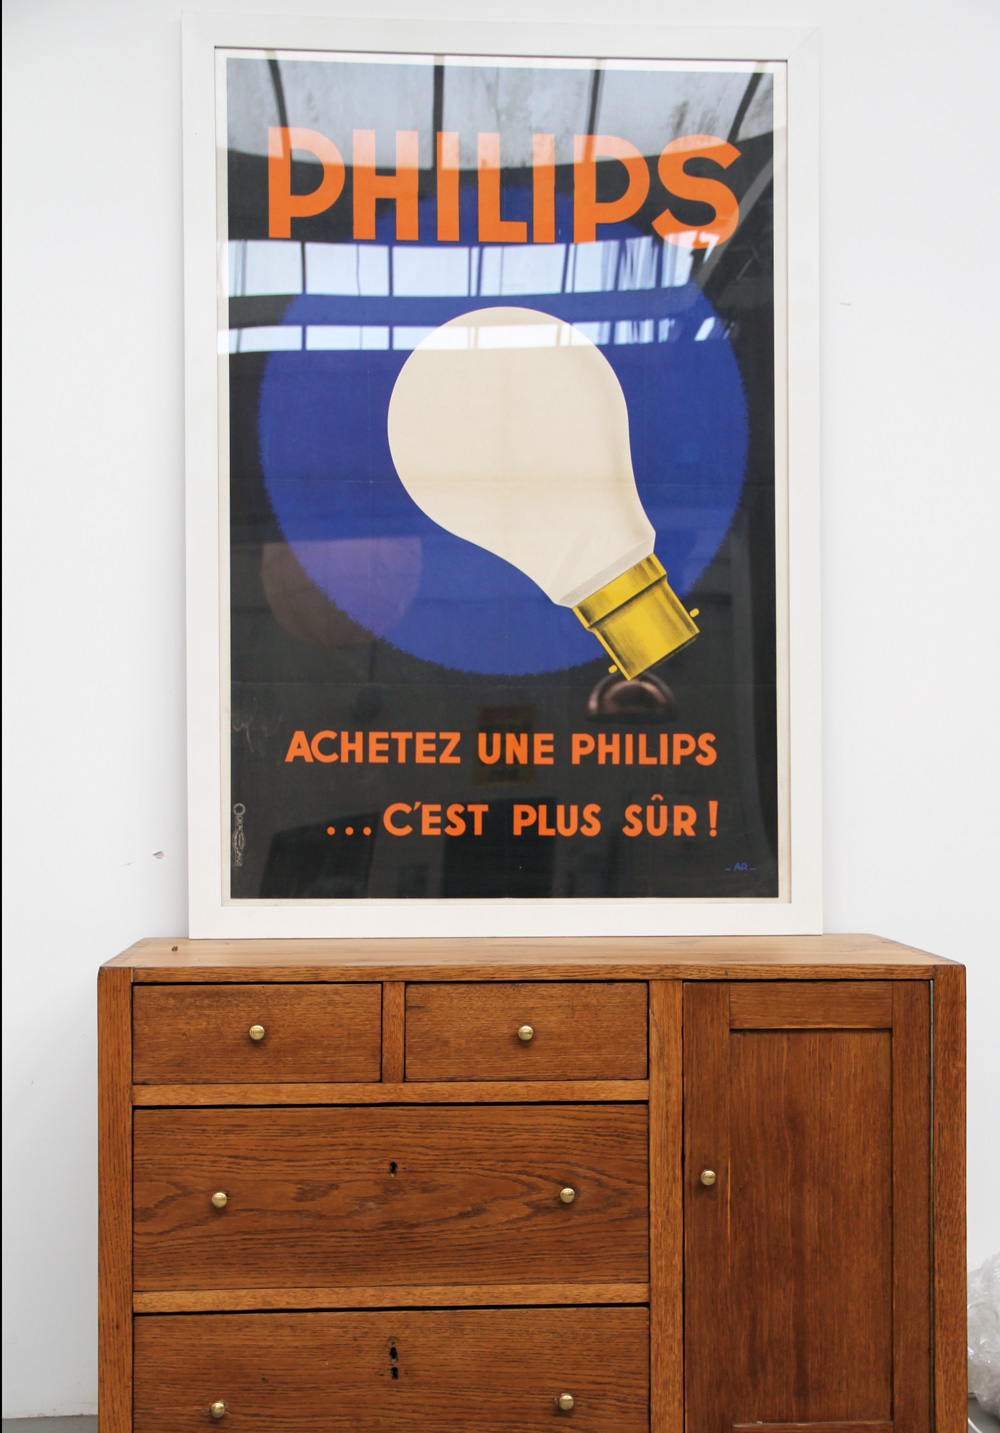 IOriginal French Philips advertising poster 1950s' Lithograph, Linen backed